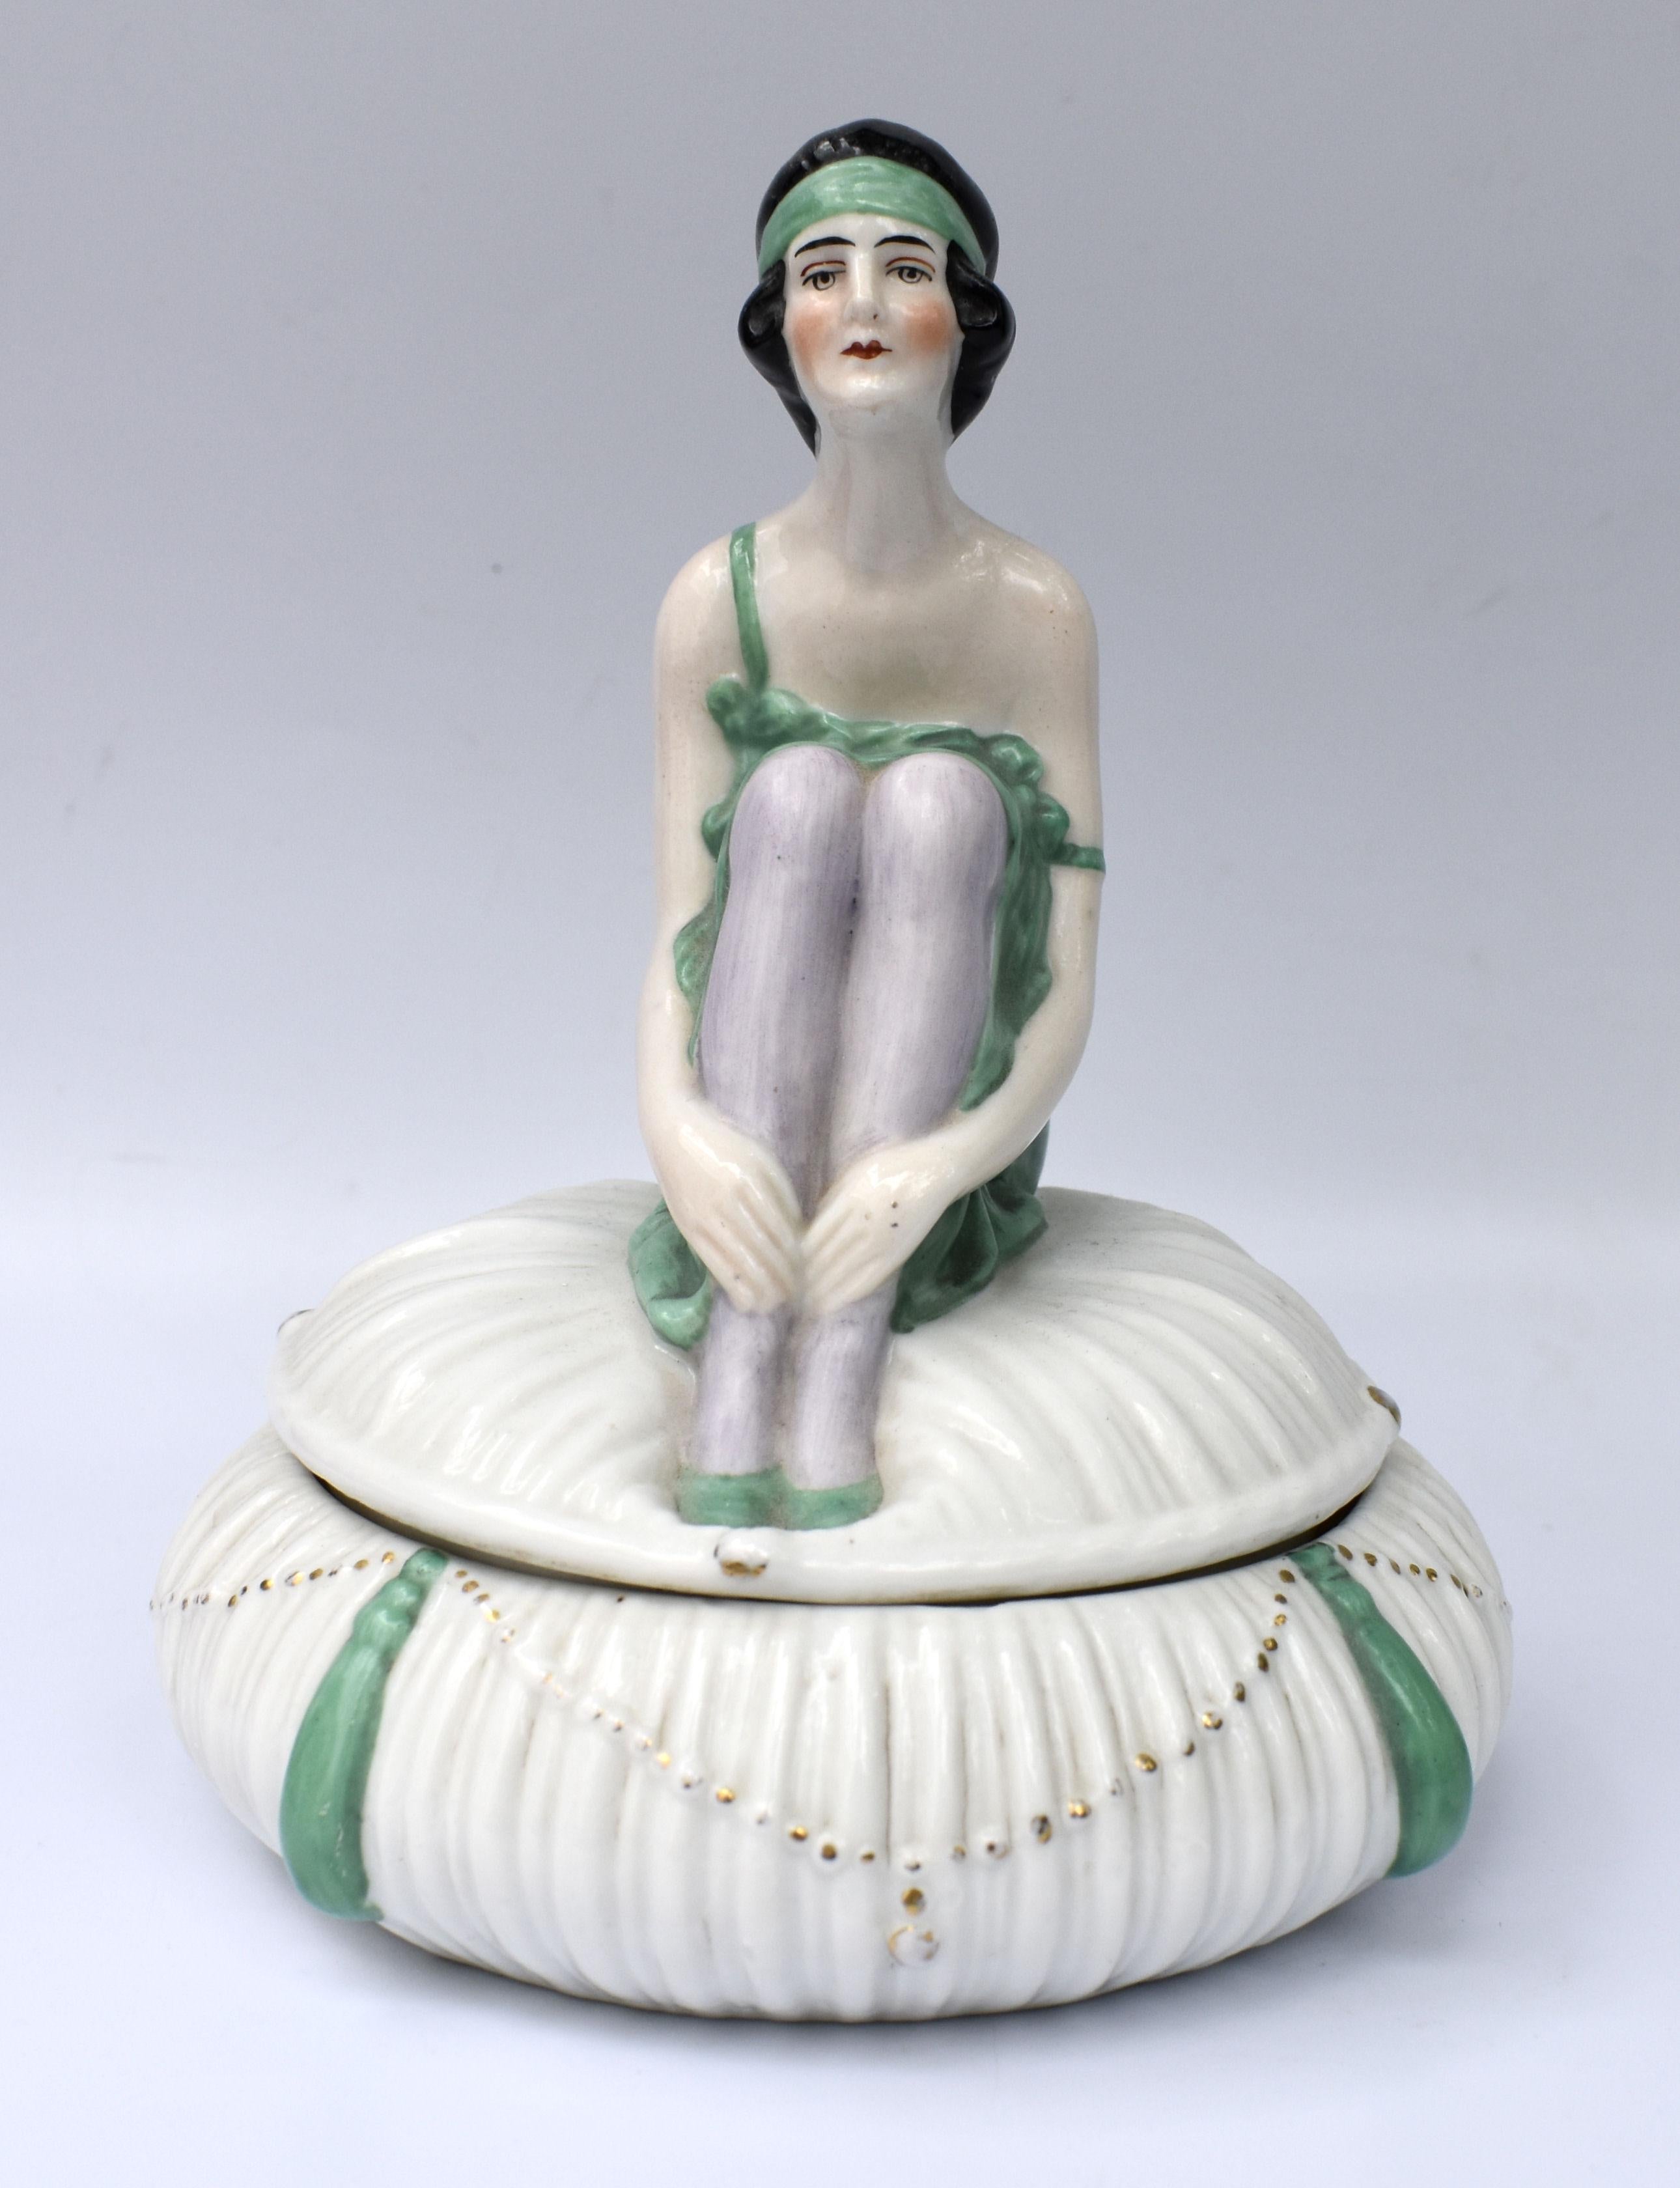 For your consideration is this very attractive and totally original 1930's Art deco ladies powder/ trinket box. Made from porcelain with a white pearled finish and gold tone gilding to the edges. The top half of the container is in the form of a